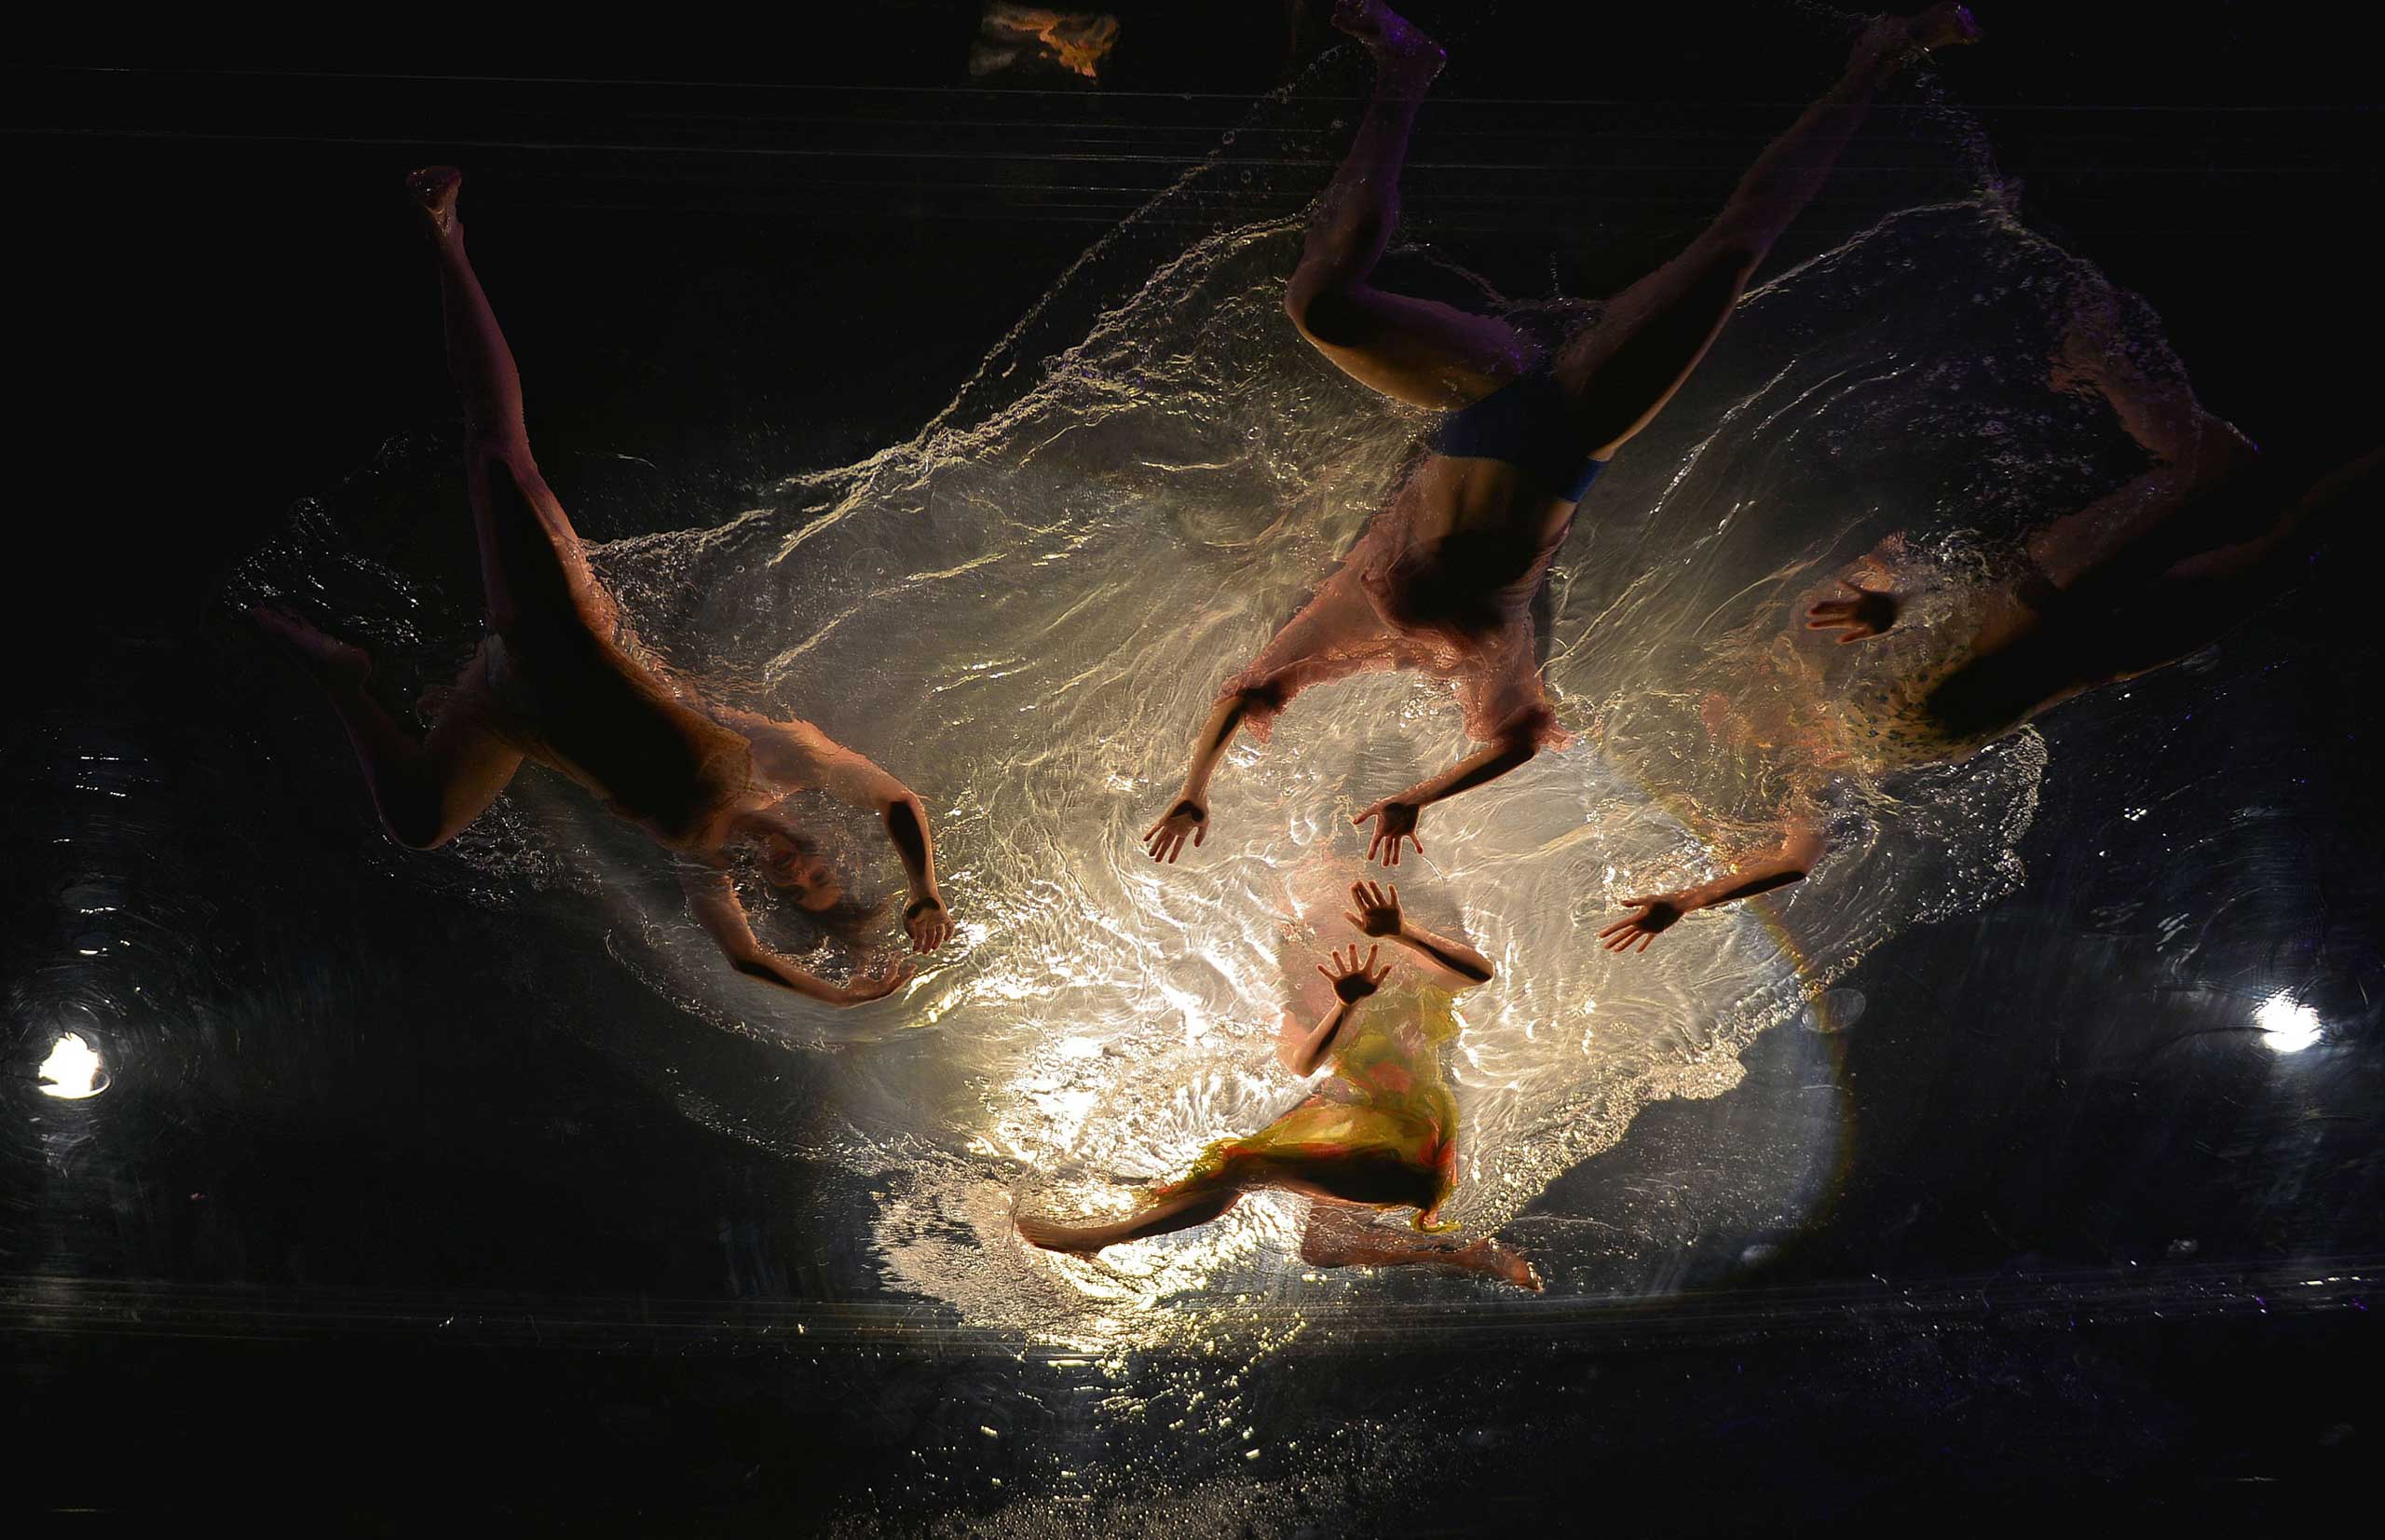 Oct. 22, 2014. Actors perform at the MixC Shopping Mall  in Chongqing, China. The  Fuerzabruta  held its first show for the next 30 formal performances within three weeks in Chongqing.  Fuerzabruta  is a creative show together with music, drama, dance, and blasting performance.